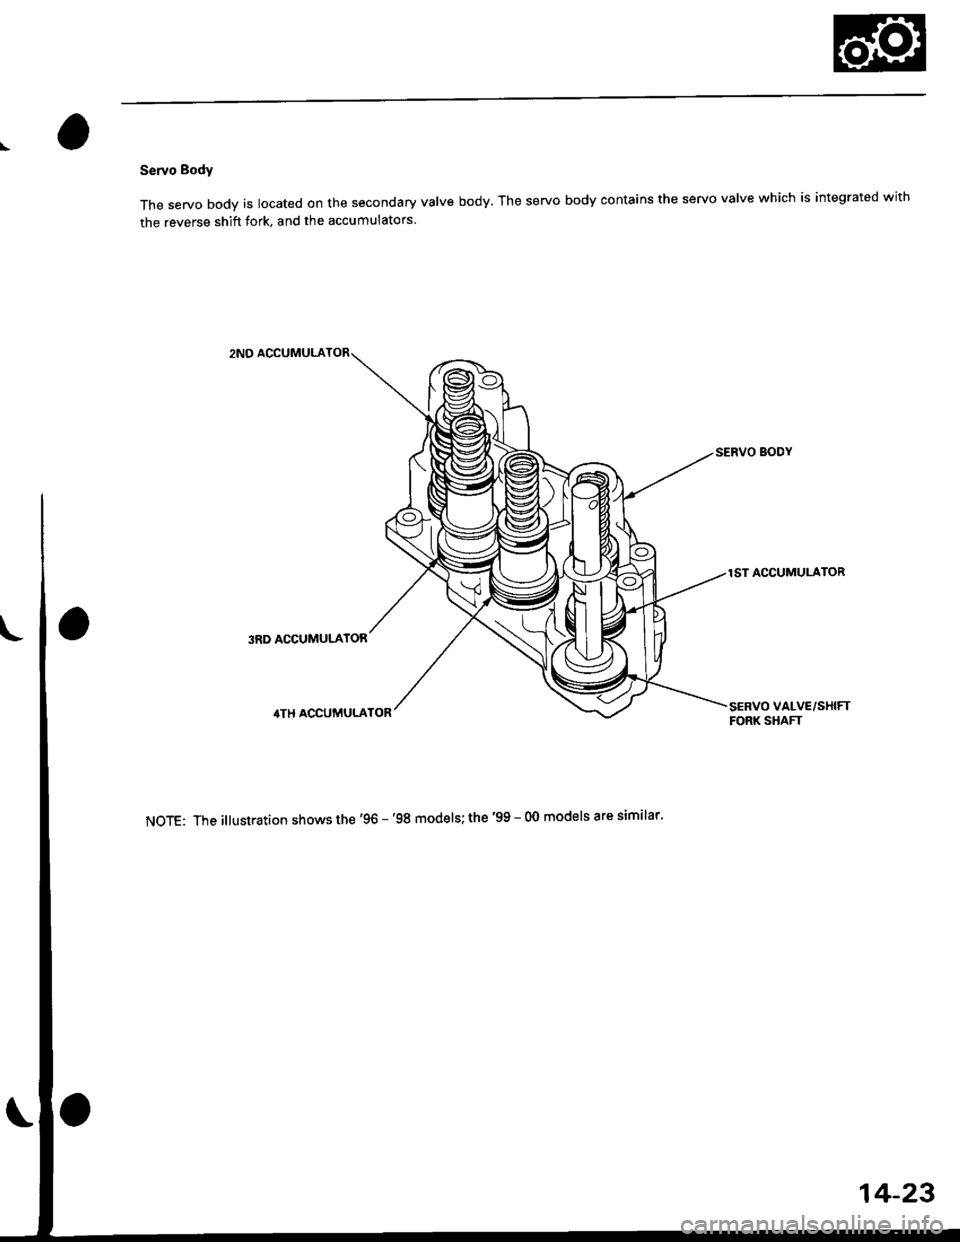 HONDA CIVIC 1998 6.G Workshop Manual \
Servo Body
The servo body is located on the secondary valve body. The servo body contains the servo valve which is integrated with
the reverse shift fork, and the accumulators
2NO ACCUMULA
SERVO BOD